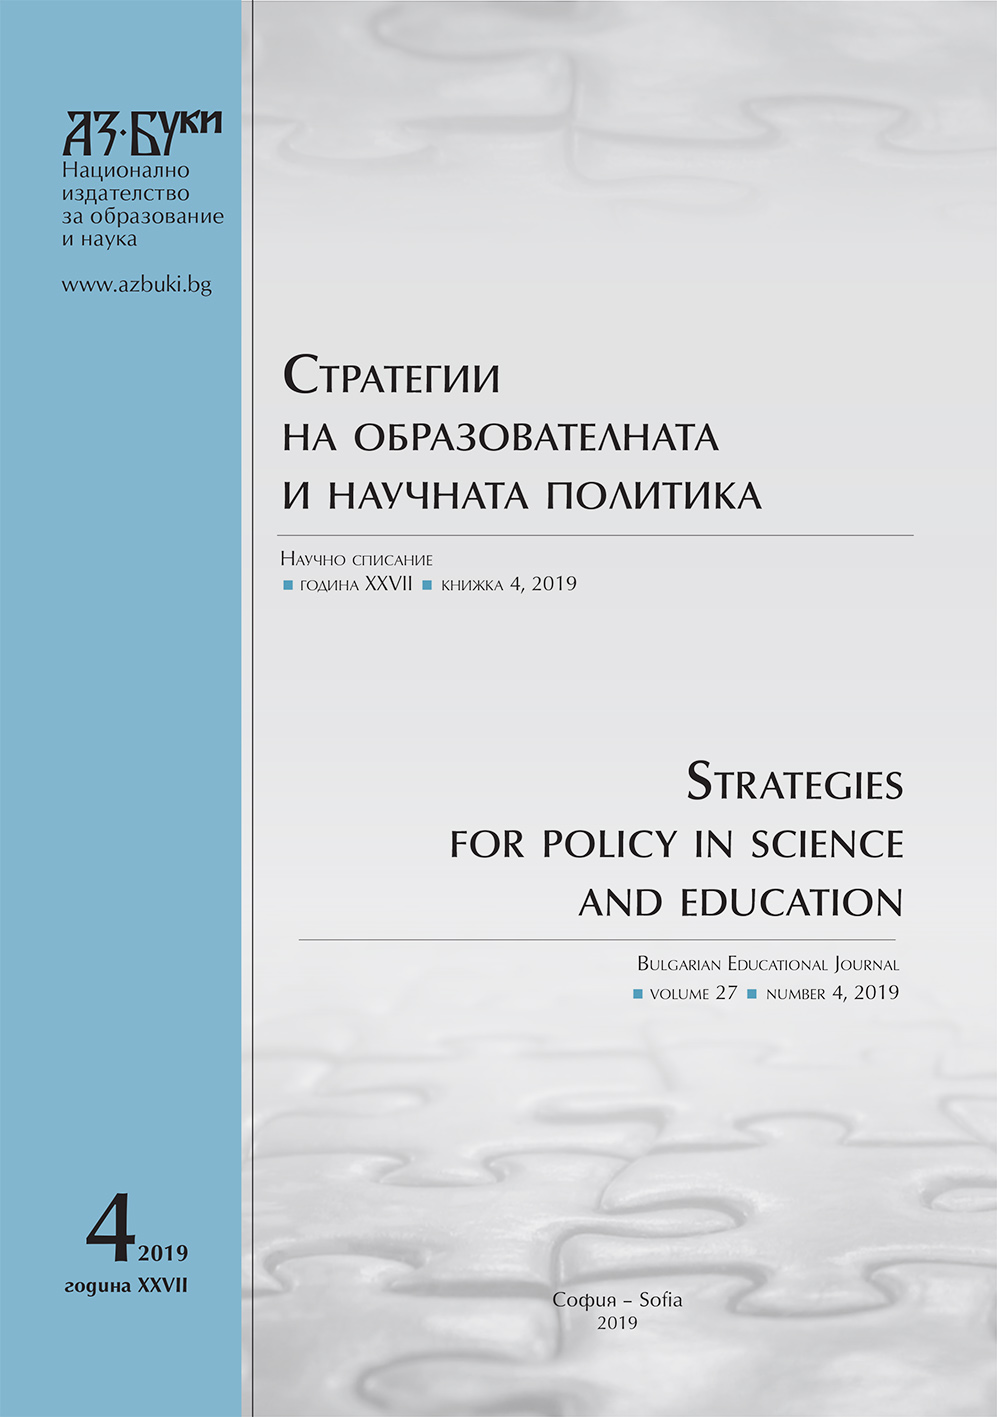 On the Logic of Scoring of Scientific Production according to the Regulations for the Application of the Act for the Development of the Academic Staff in the Republic of Bulgaria Cover Image